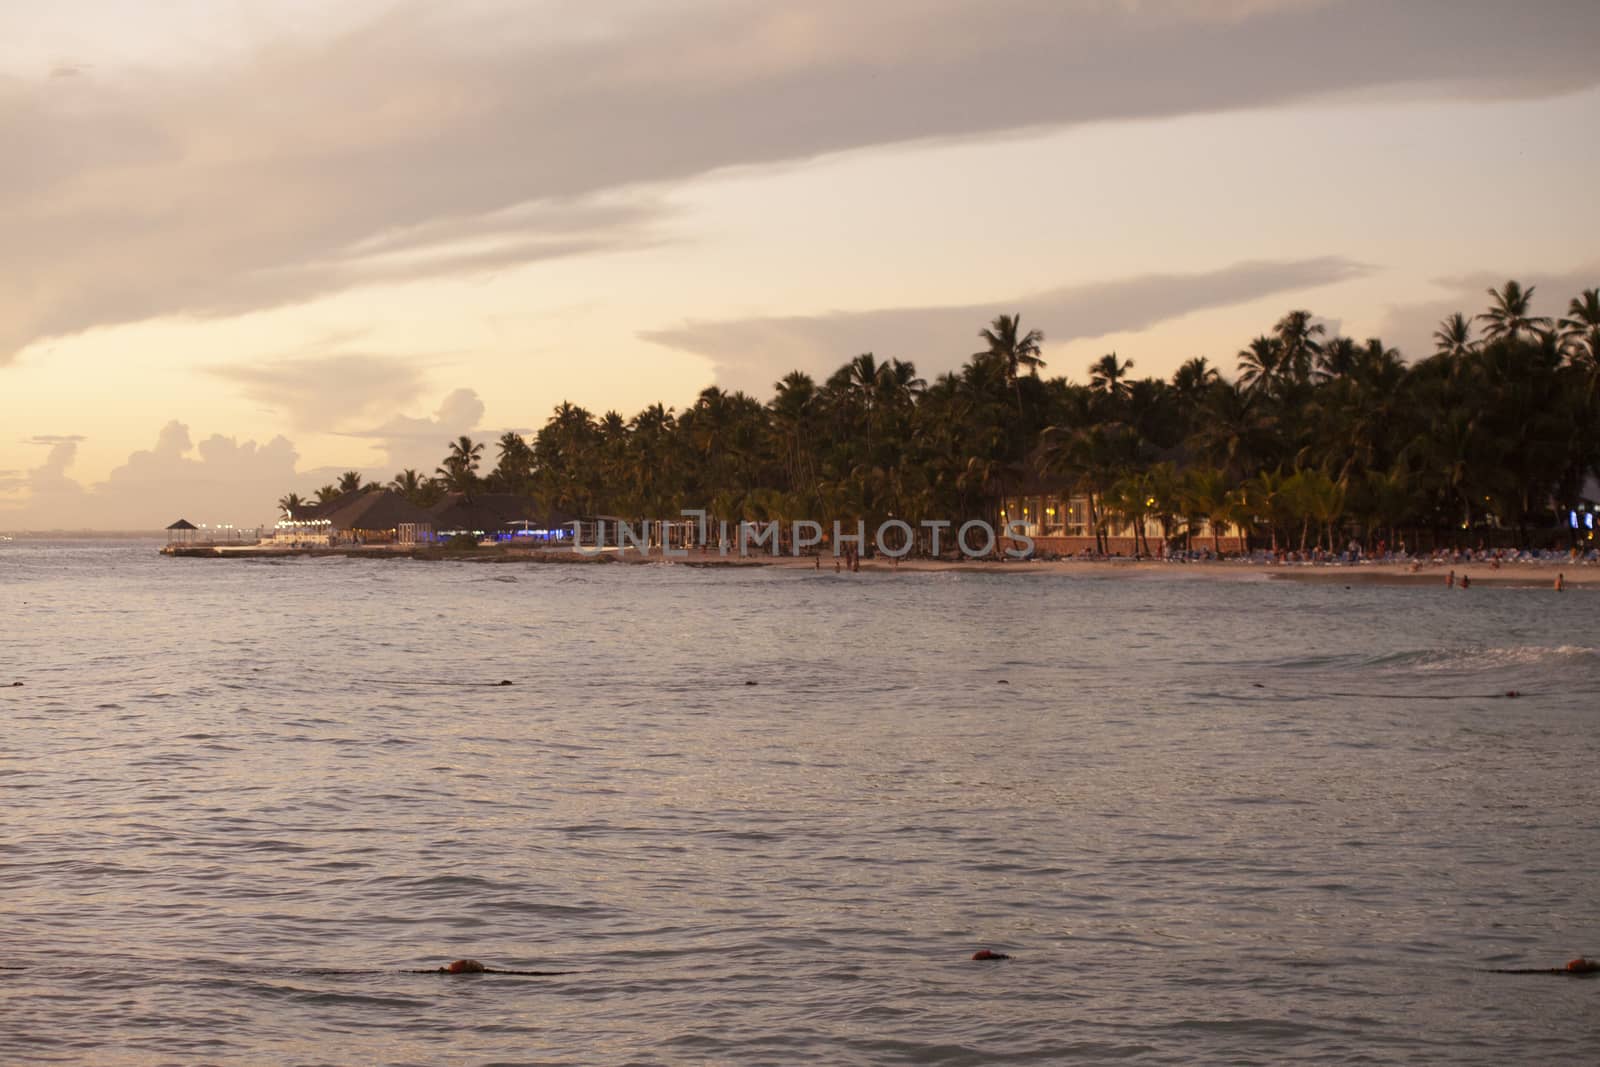 Dominicus Shoreline at sunset by pippocarlot